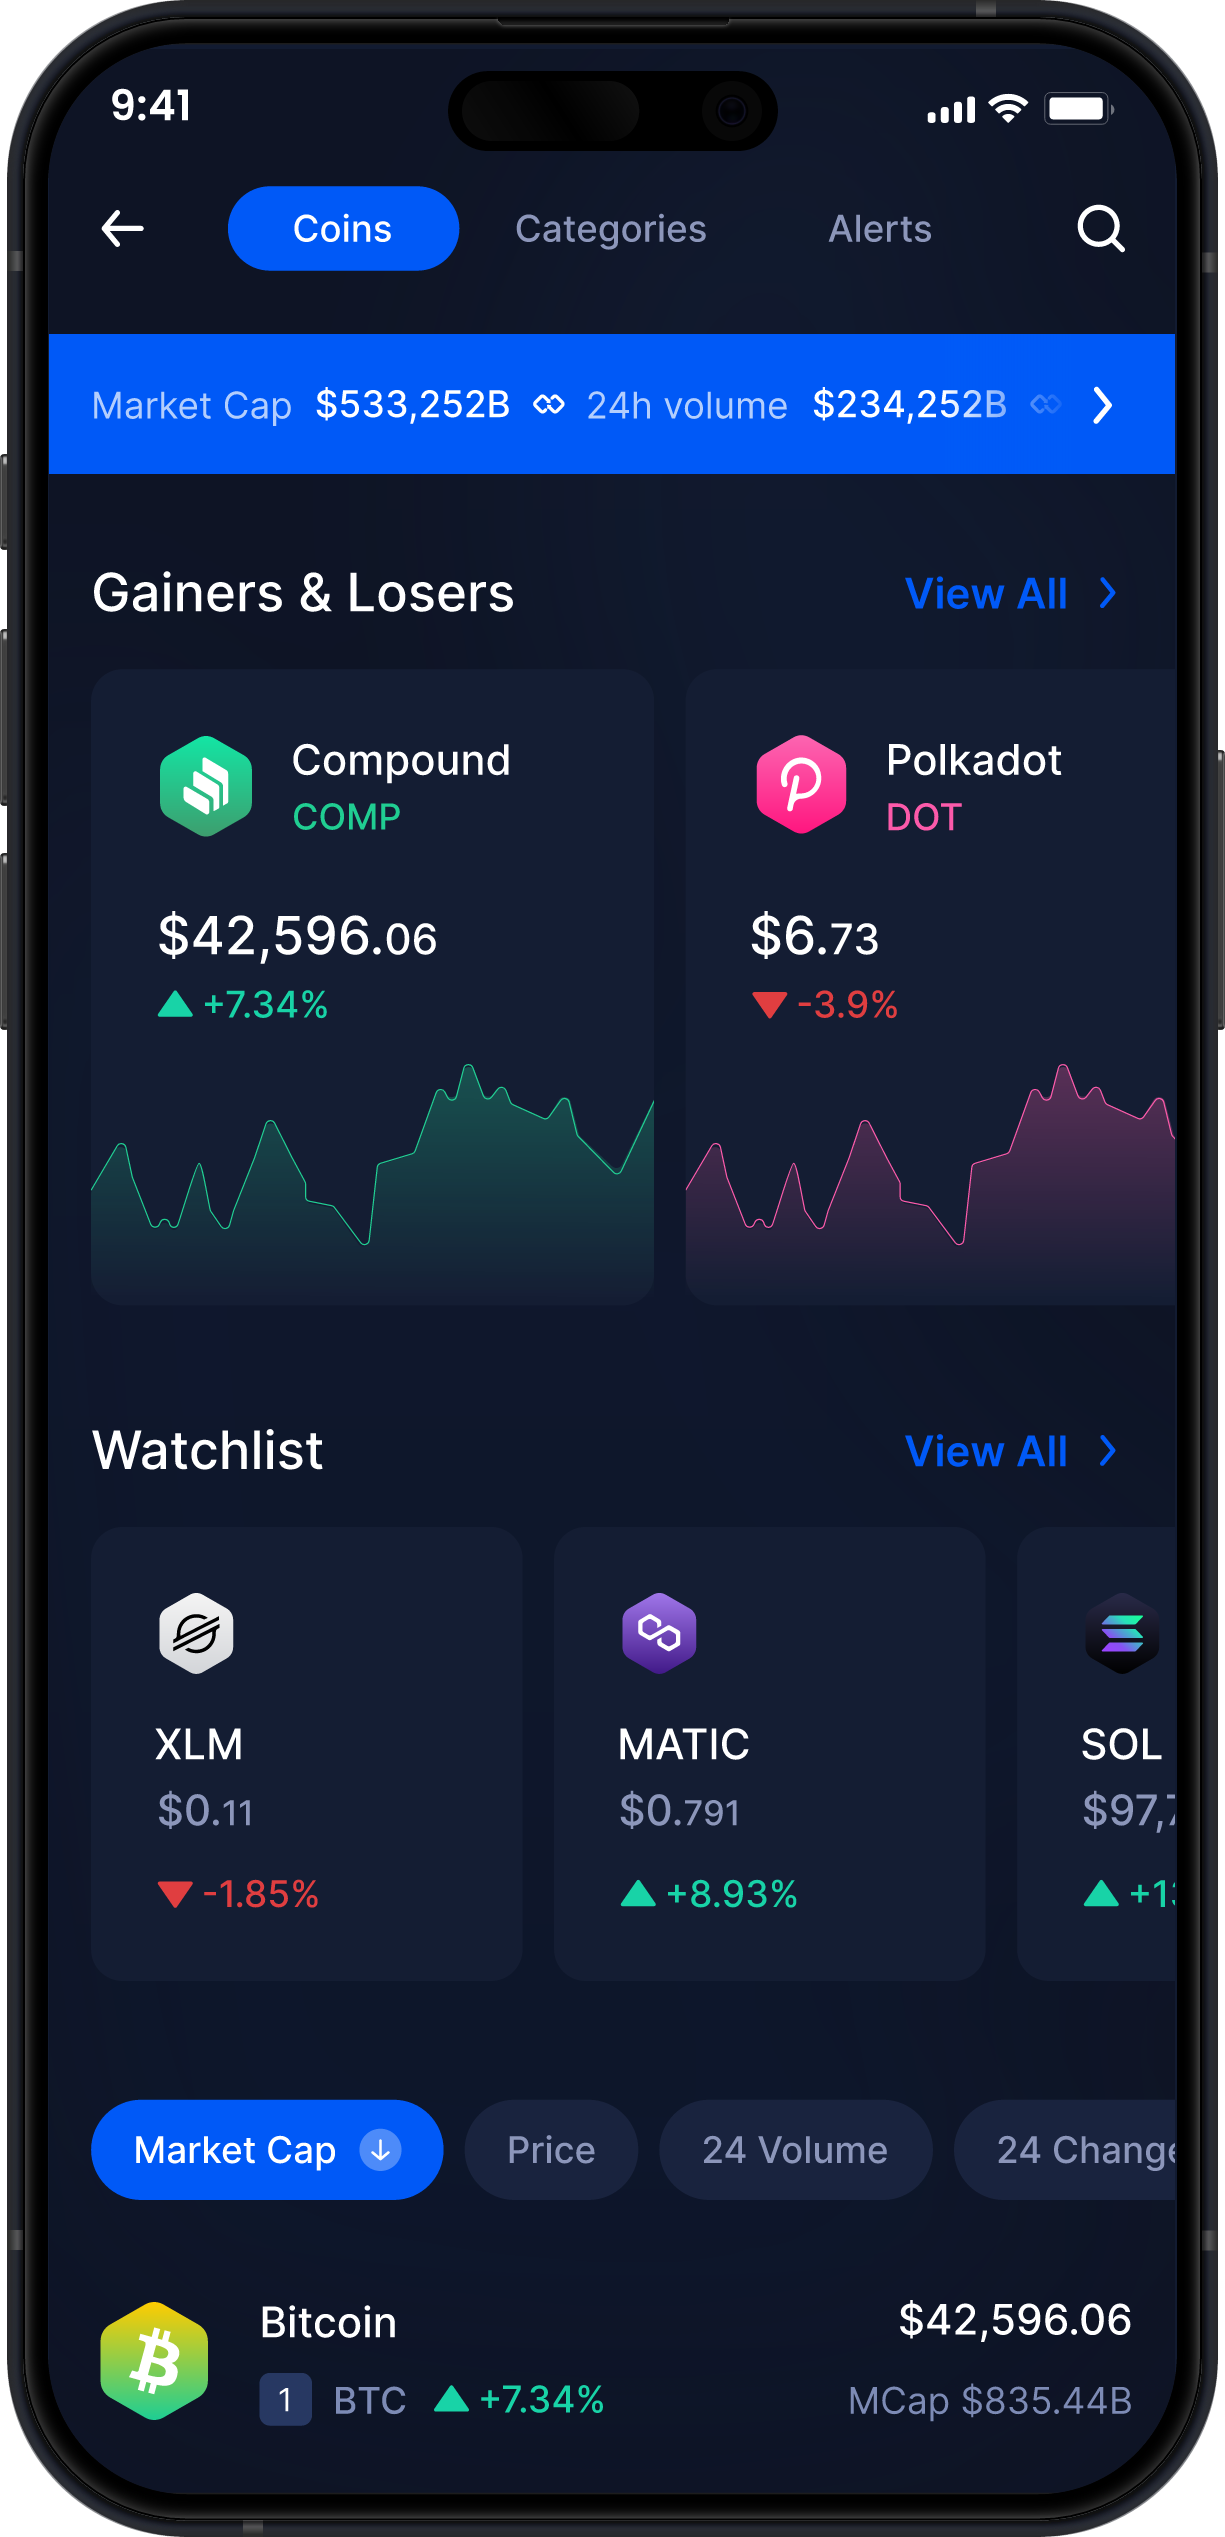 Infinity Mobile Compound Wallet - COMP Market Stats & Tracker